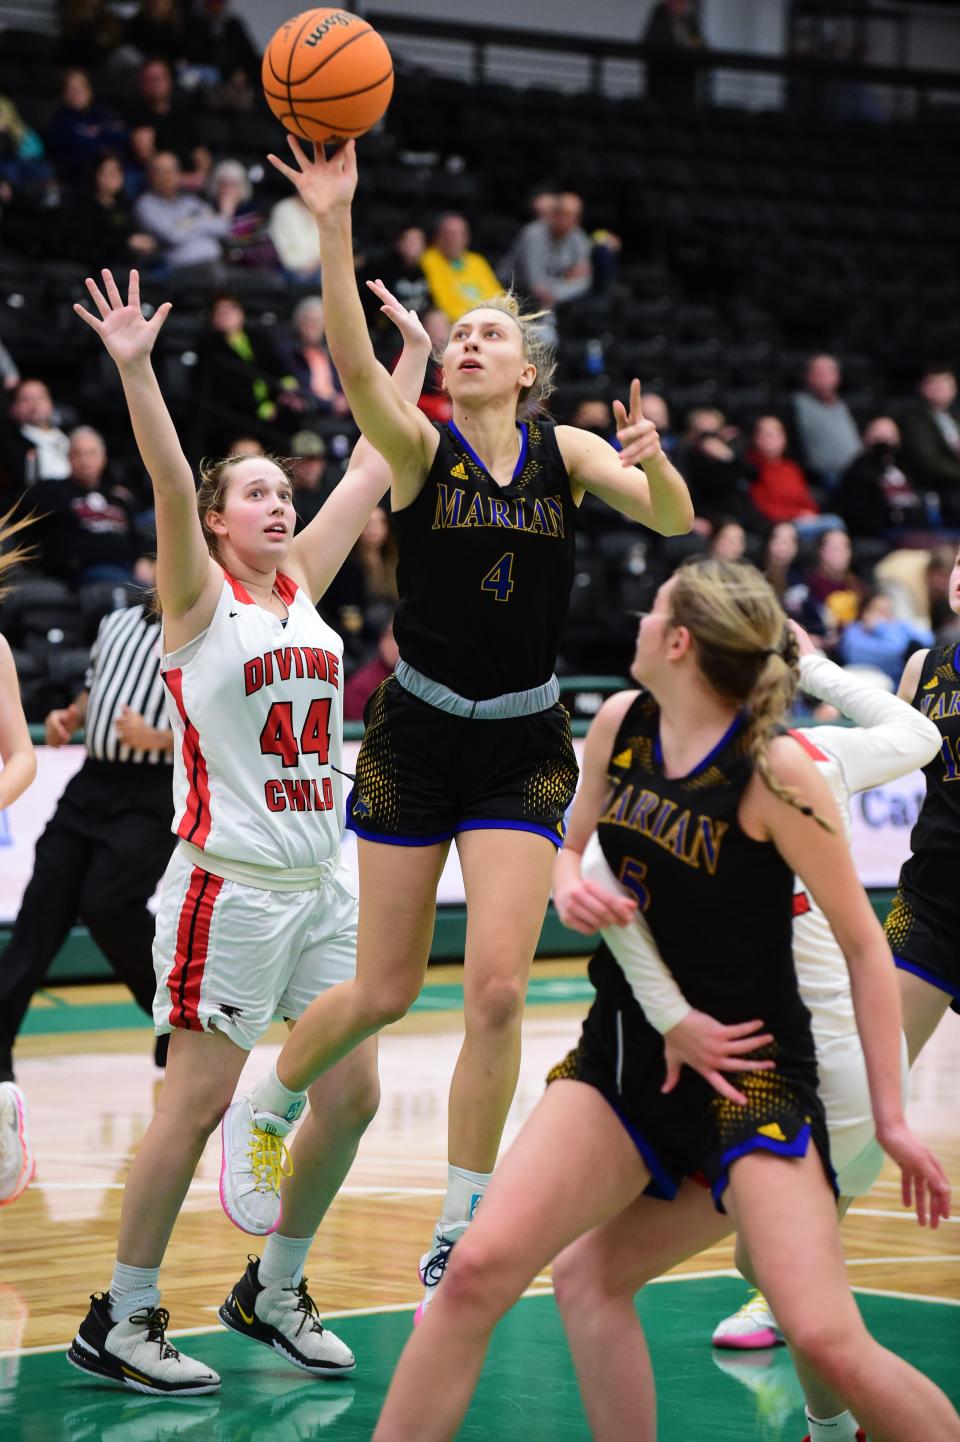 Bloomfield Hills Marian's Sarah Sylvester shoots during the Catholic League girls basketball tournament championship on Saturday, Feb. 19, 2022, at Wayne State University.